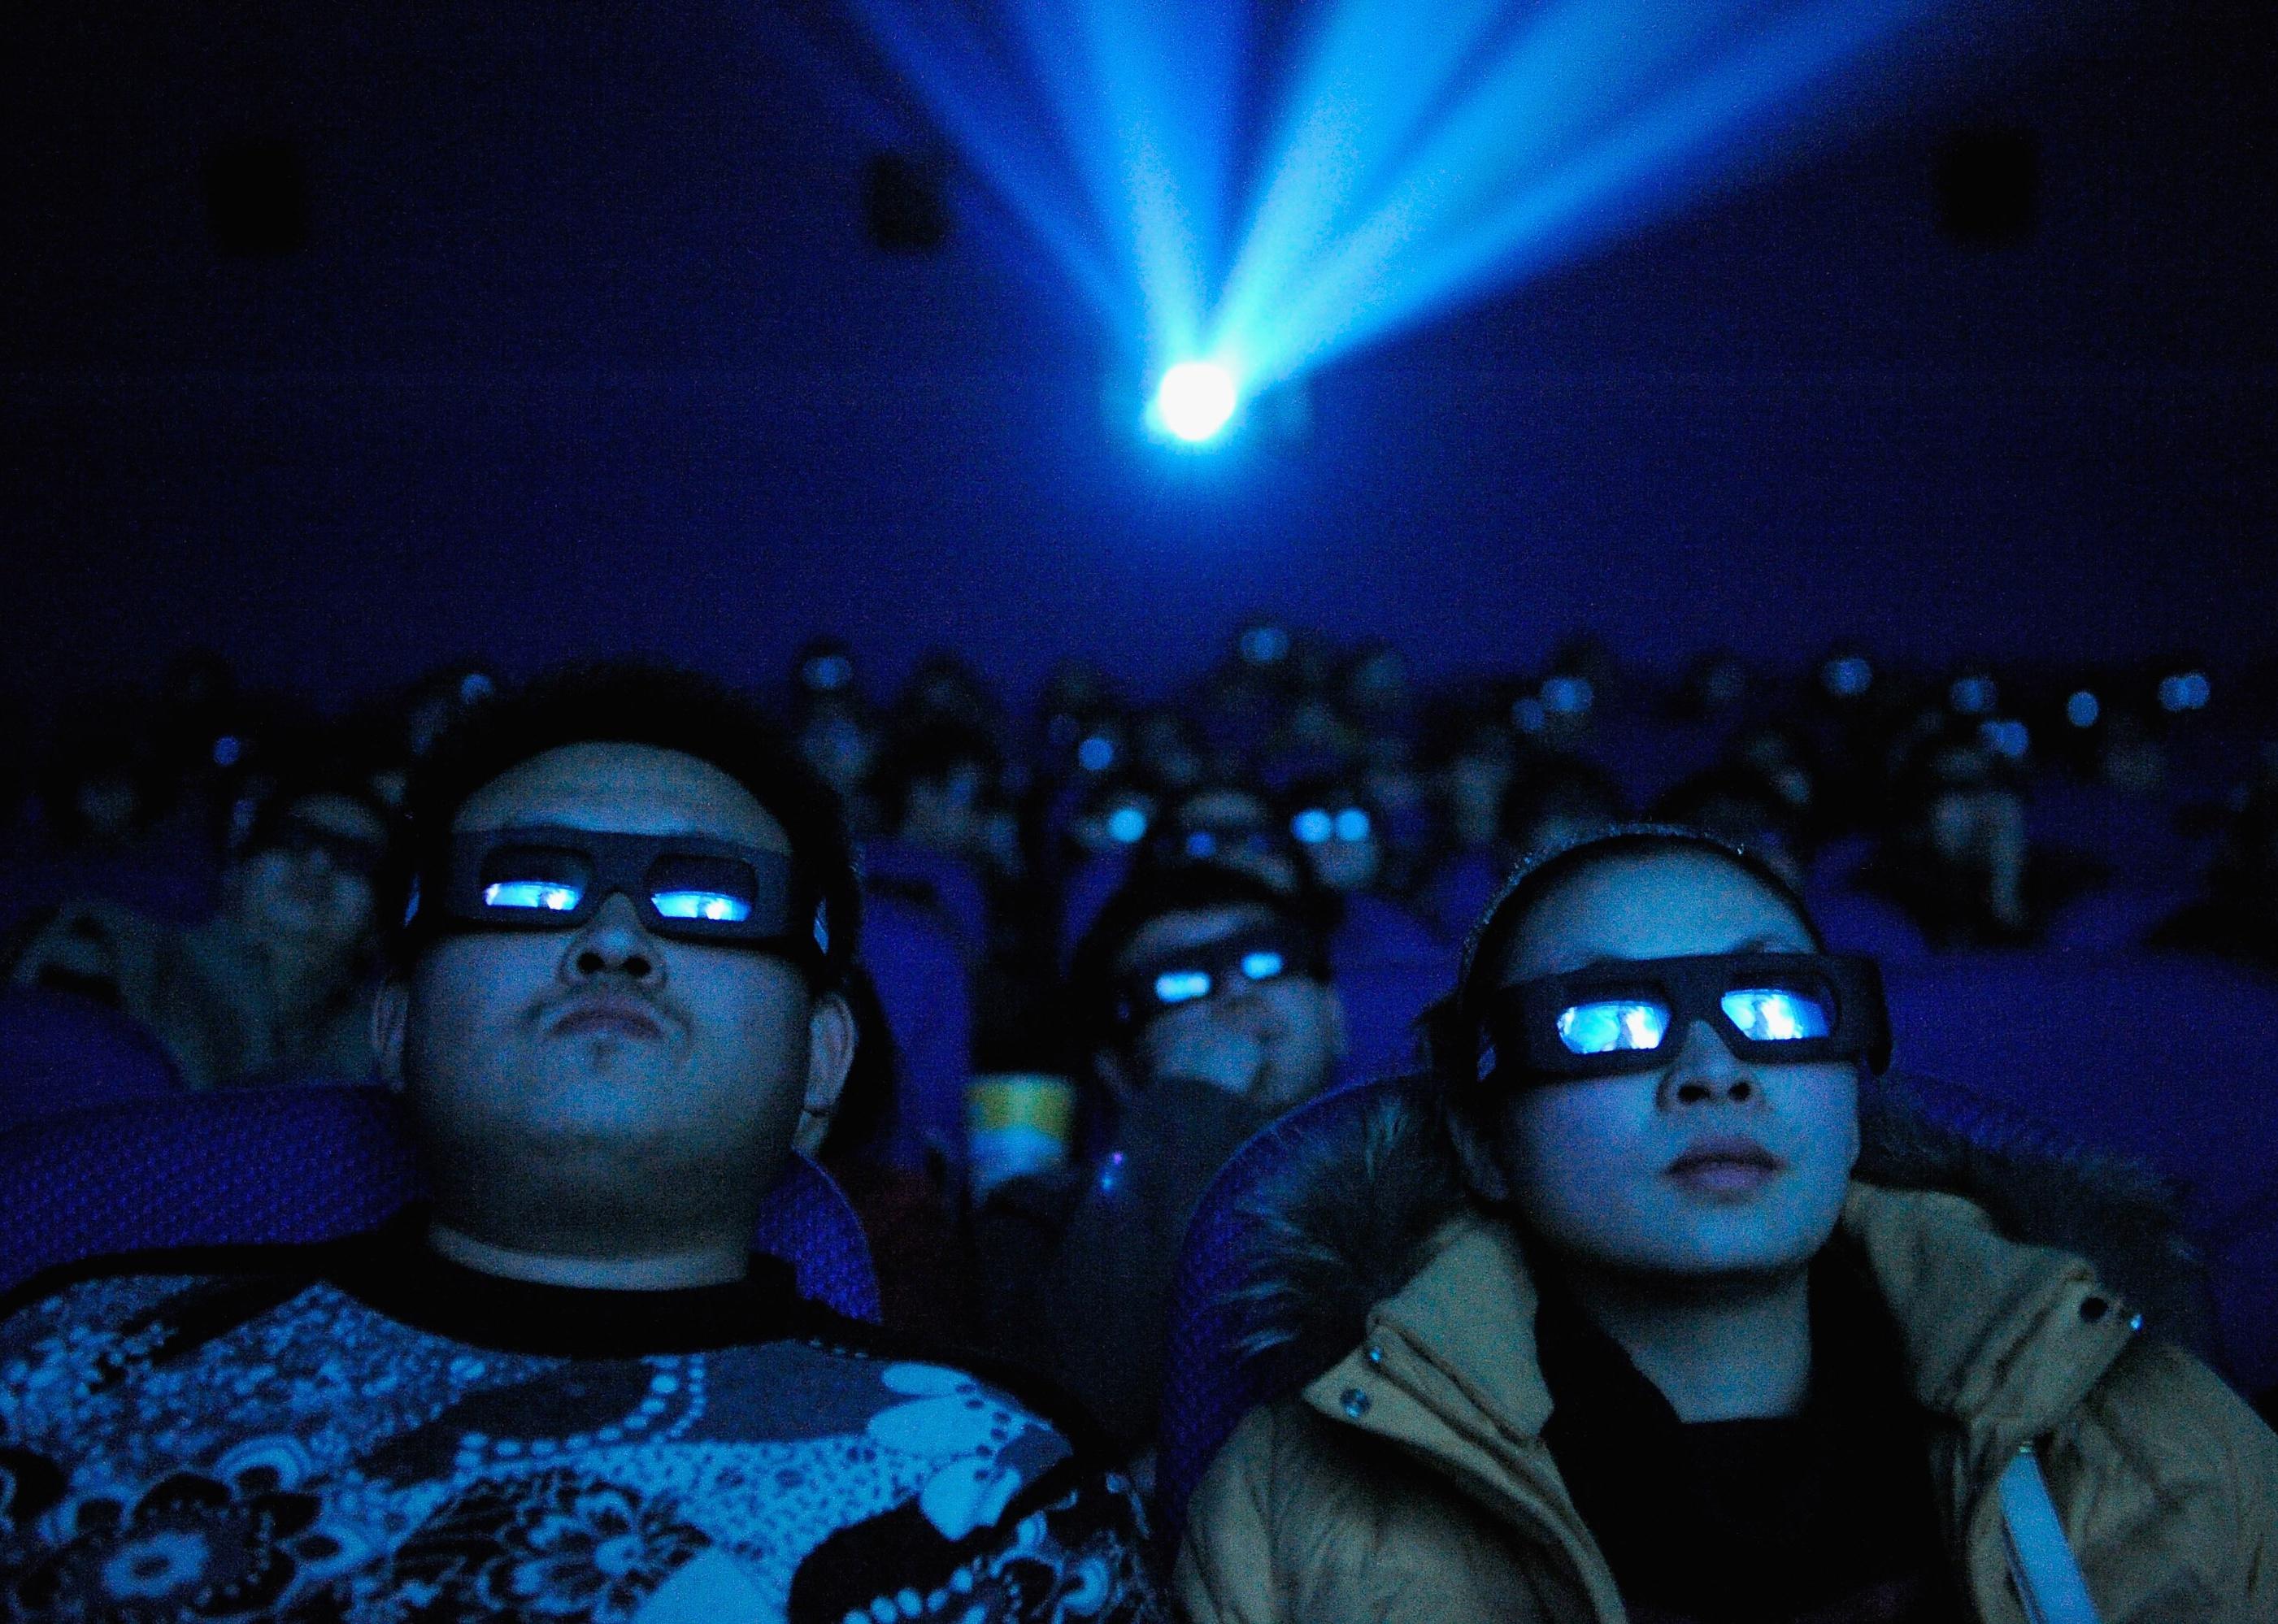 Avatar fans watching the movie with 3D glasses as blue light shines on them from the screen.